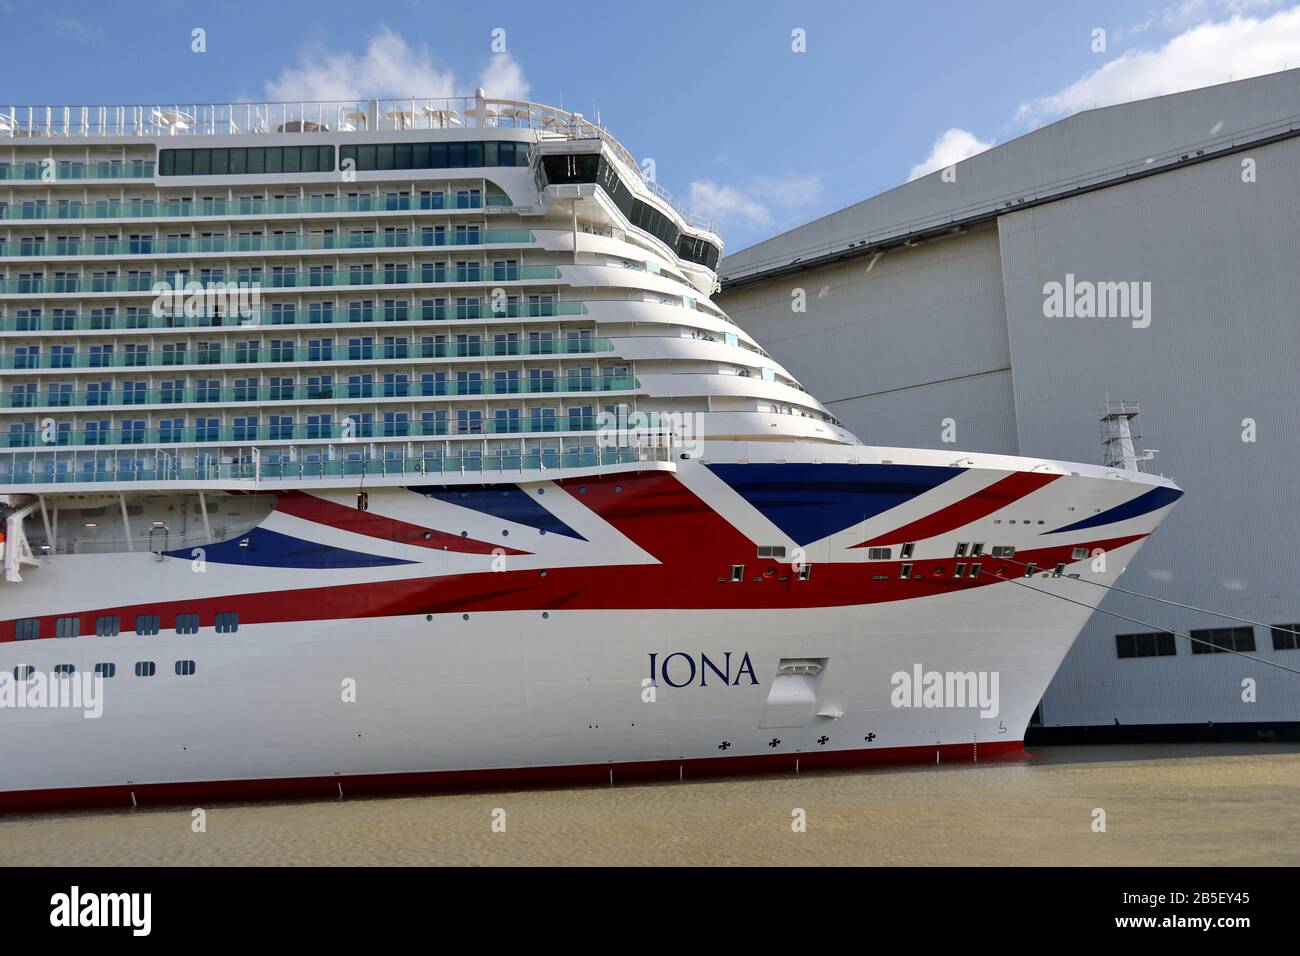 The new cruise ship IONA will be moored in front of the Meyer shipyard in Papenburg on March 1, 2020. Stock Photo